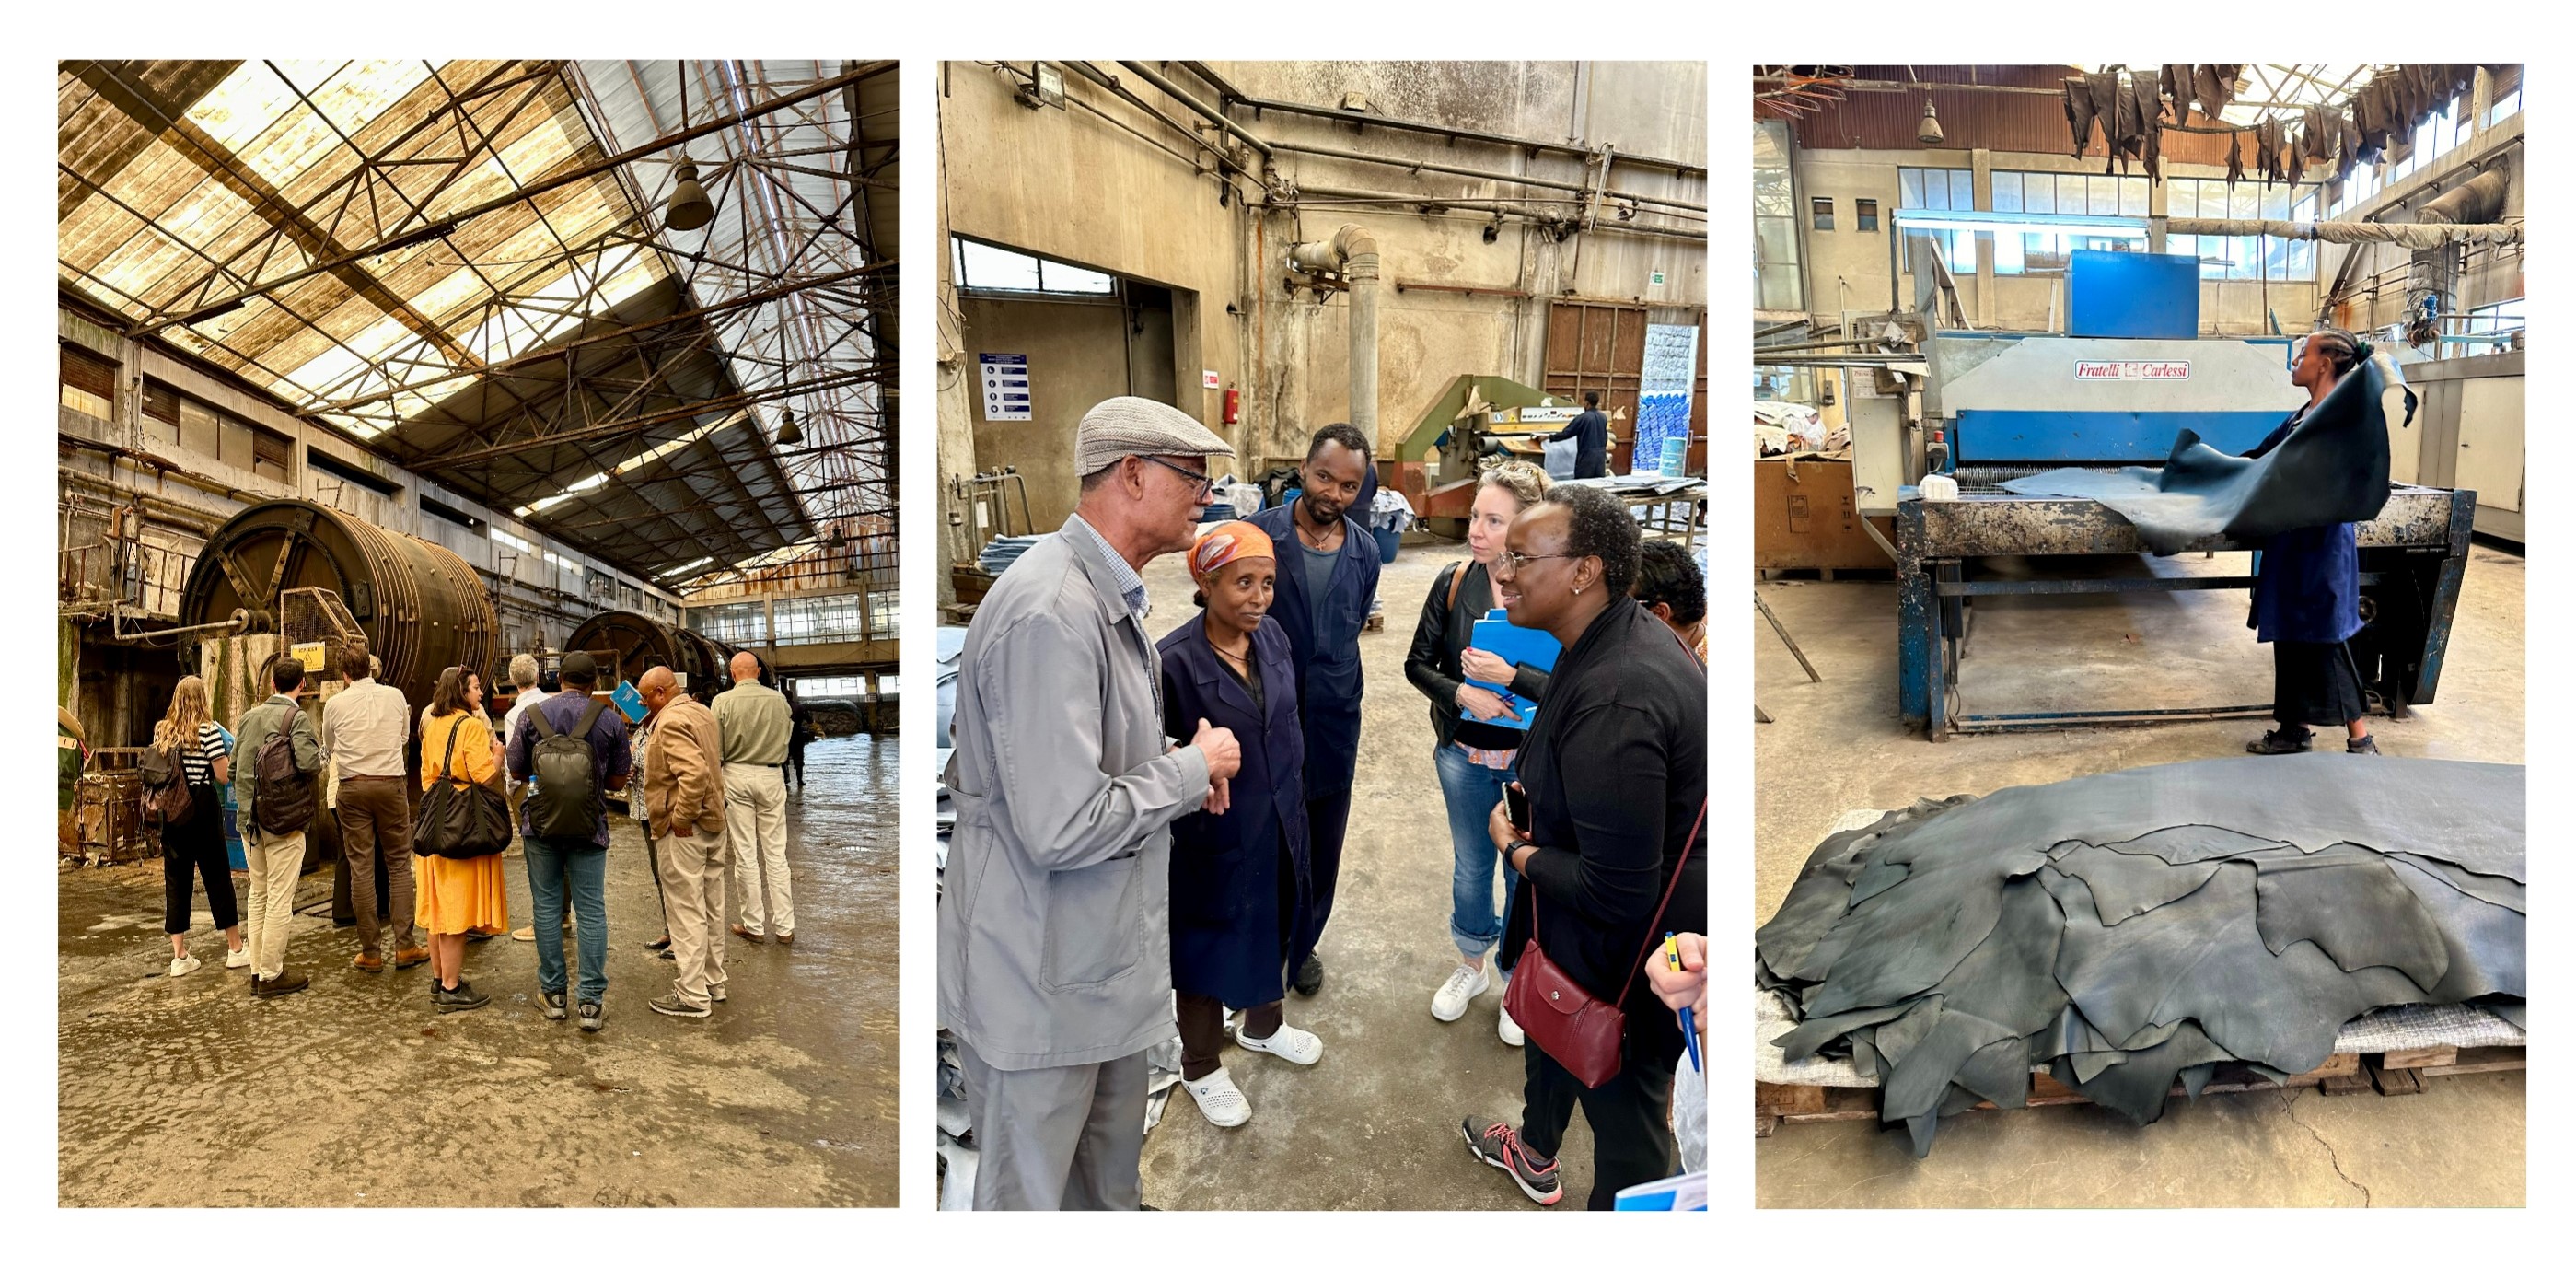  A practical exploration of the dynamic leather production value chain as part of the field visit © EUTF